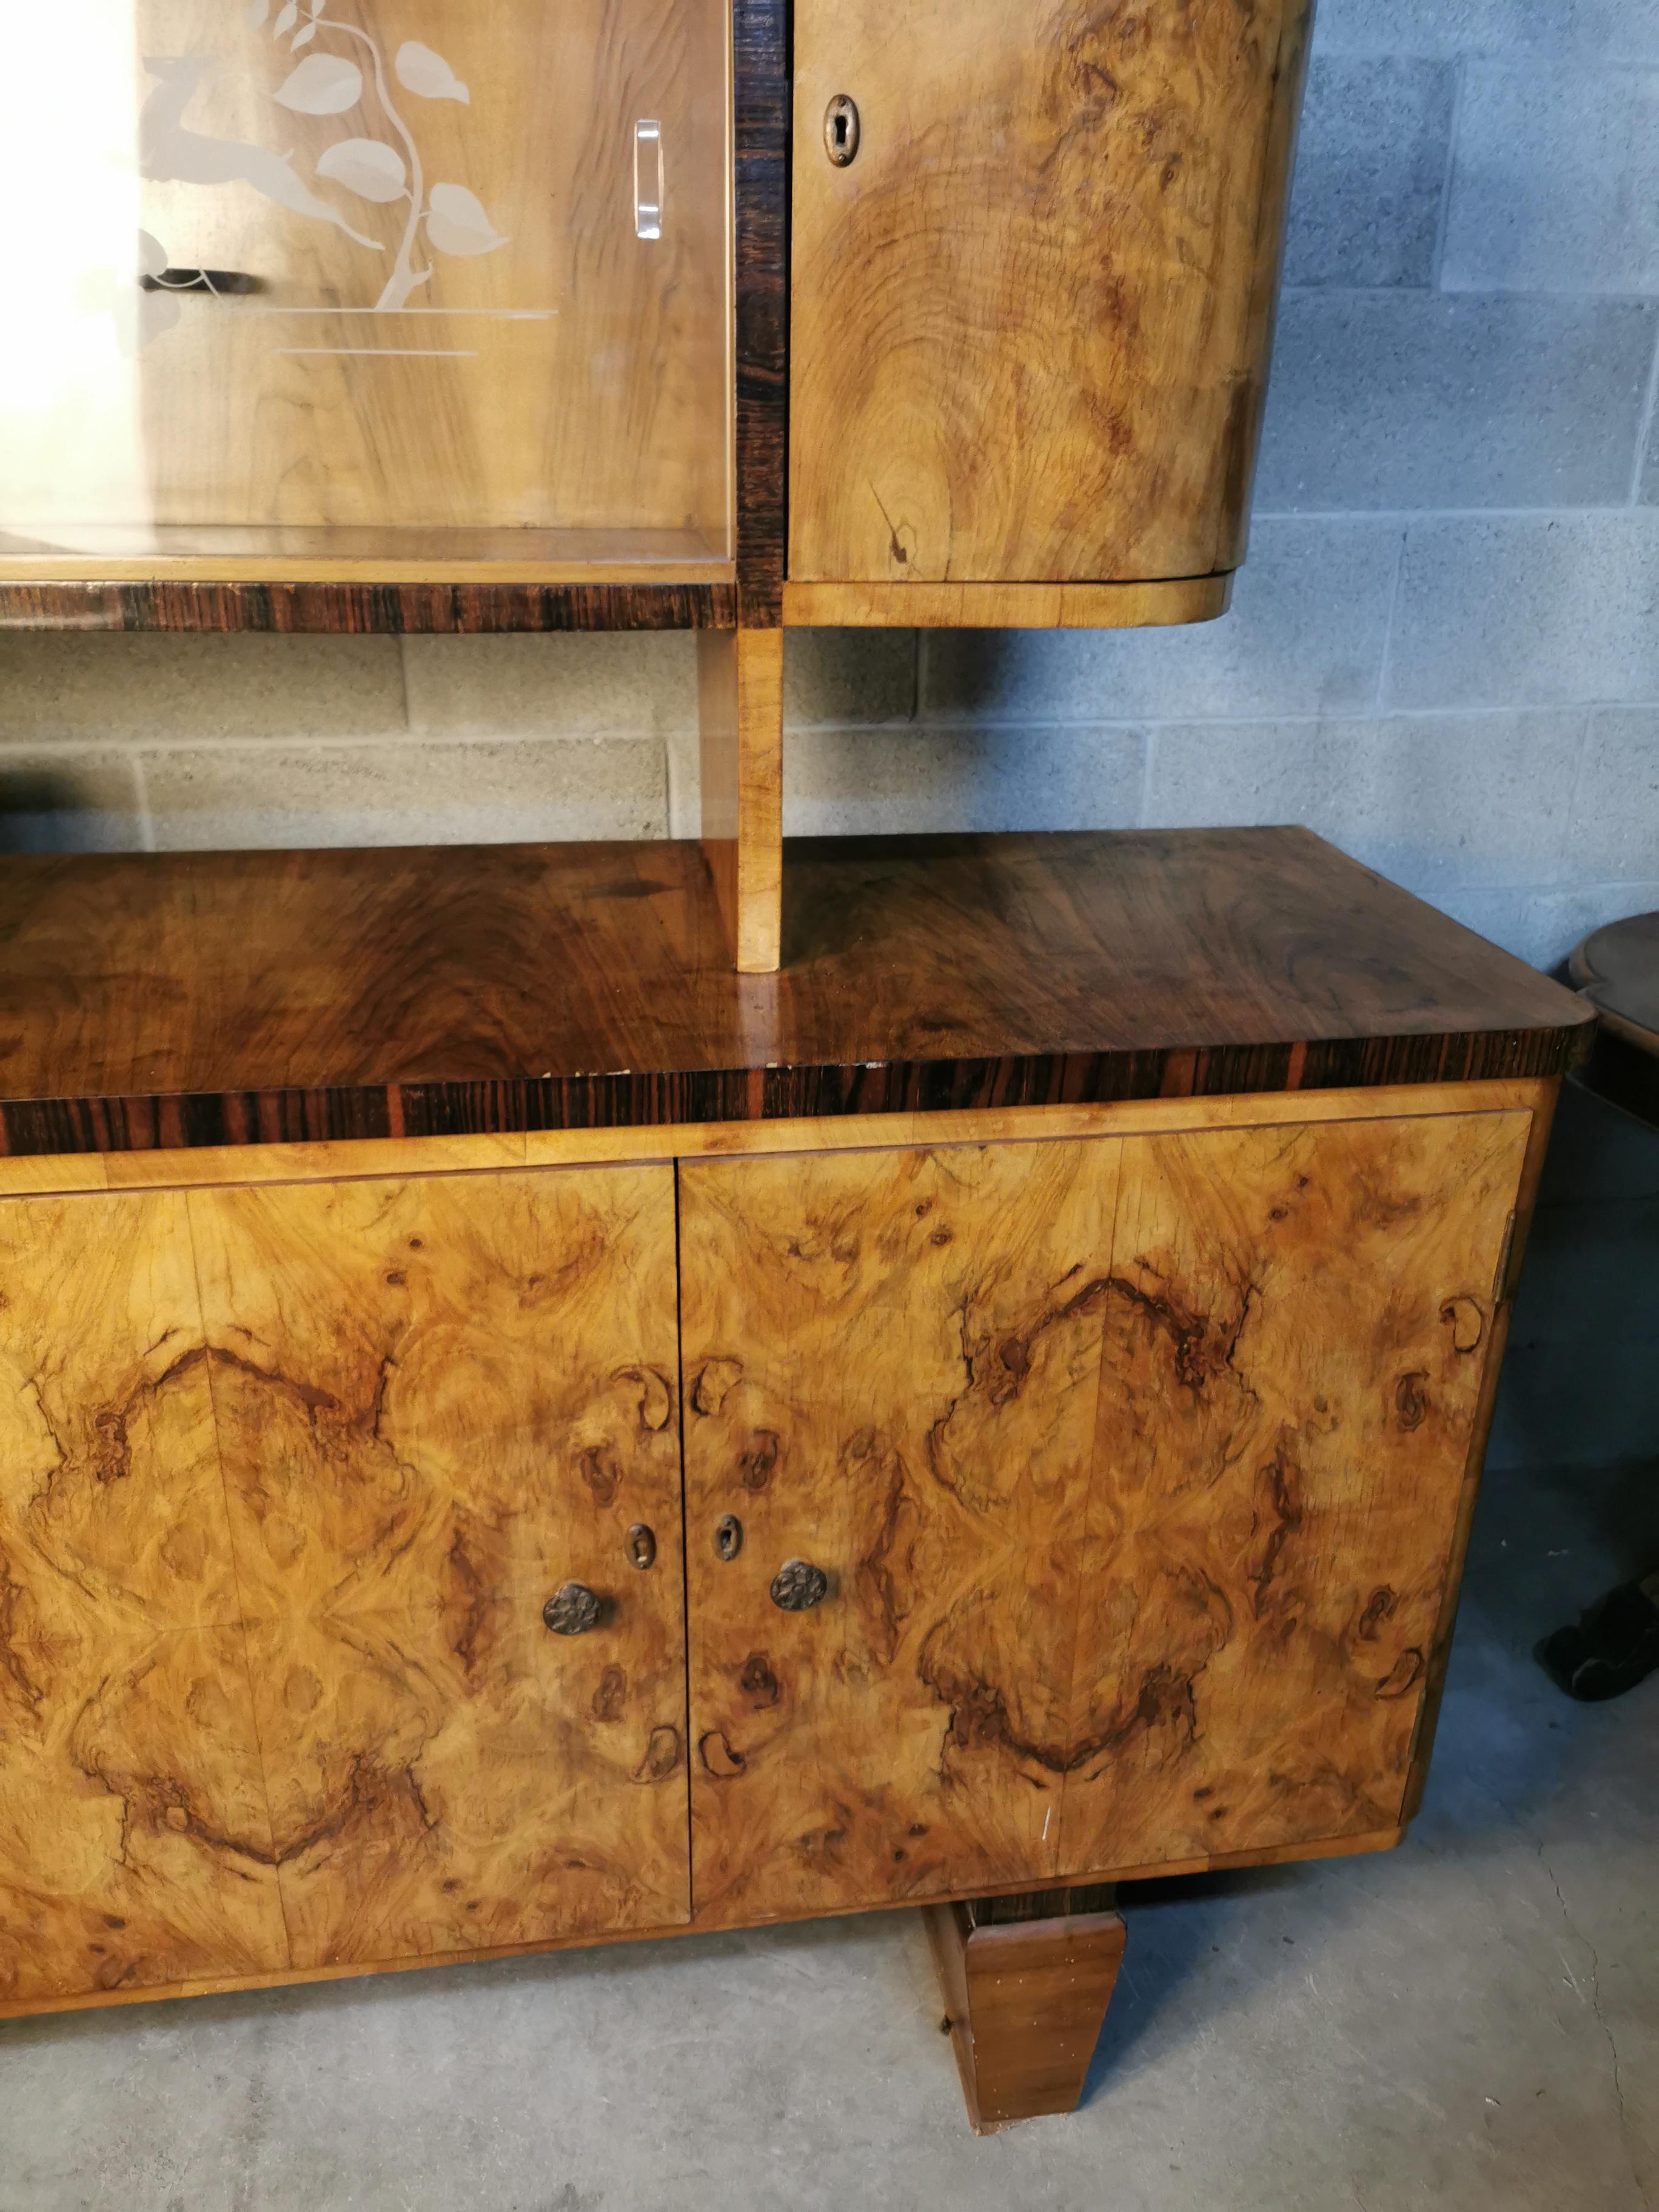 Art Deco credenza sideboard in burl wood circa 1920 Italy 
credeza 51x170x105H cm 
vitrine 34x136x65H cm vitrine top part can be remove 
total height 170 cm.
 there is fast shipping to italy and europe
italian art deco period credenza